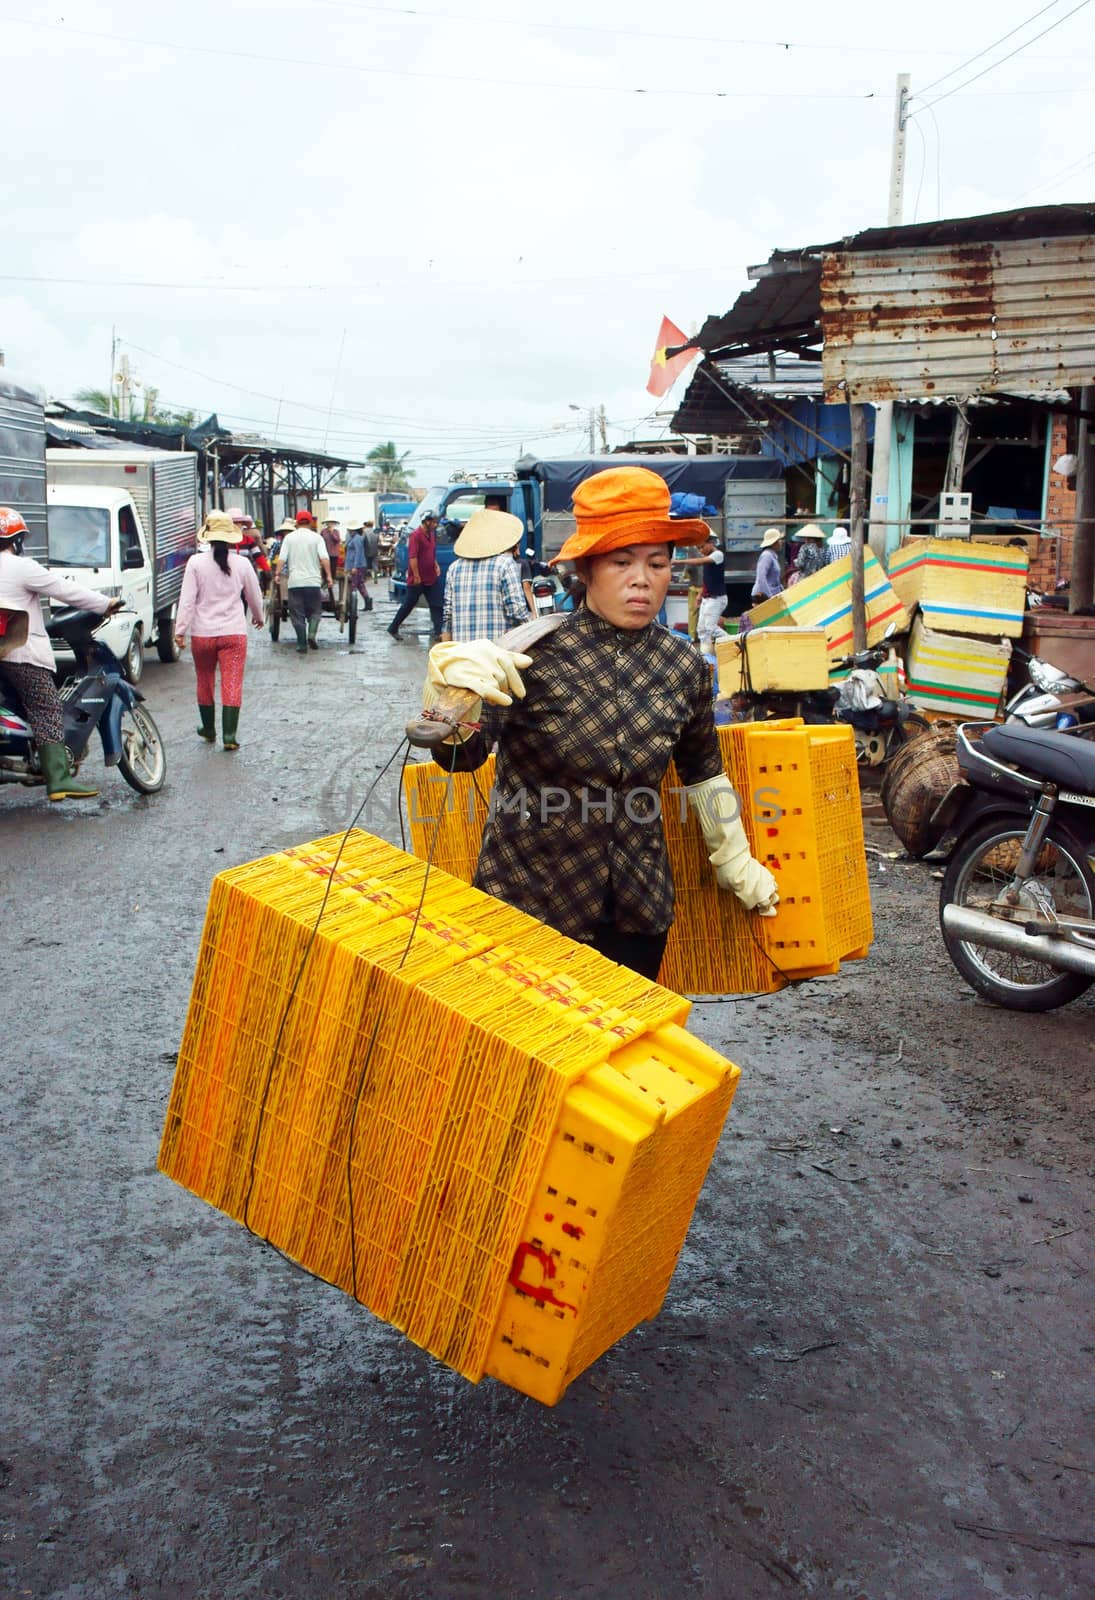 The women with tired face rattan plastic tray into market, she wear yellow hat, step on marshy. July 15, 2013